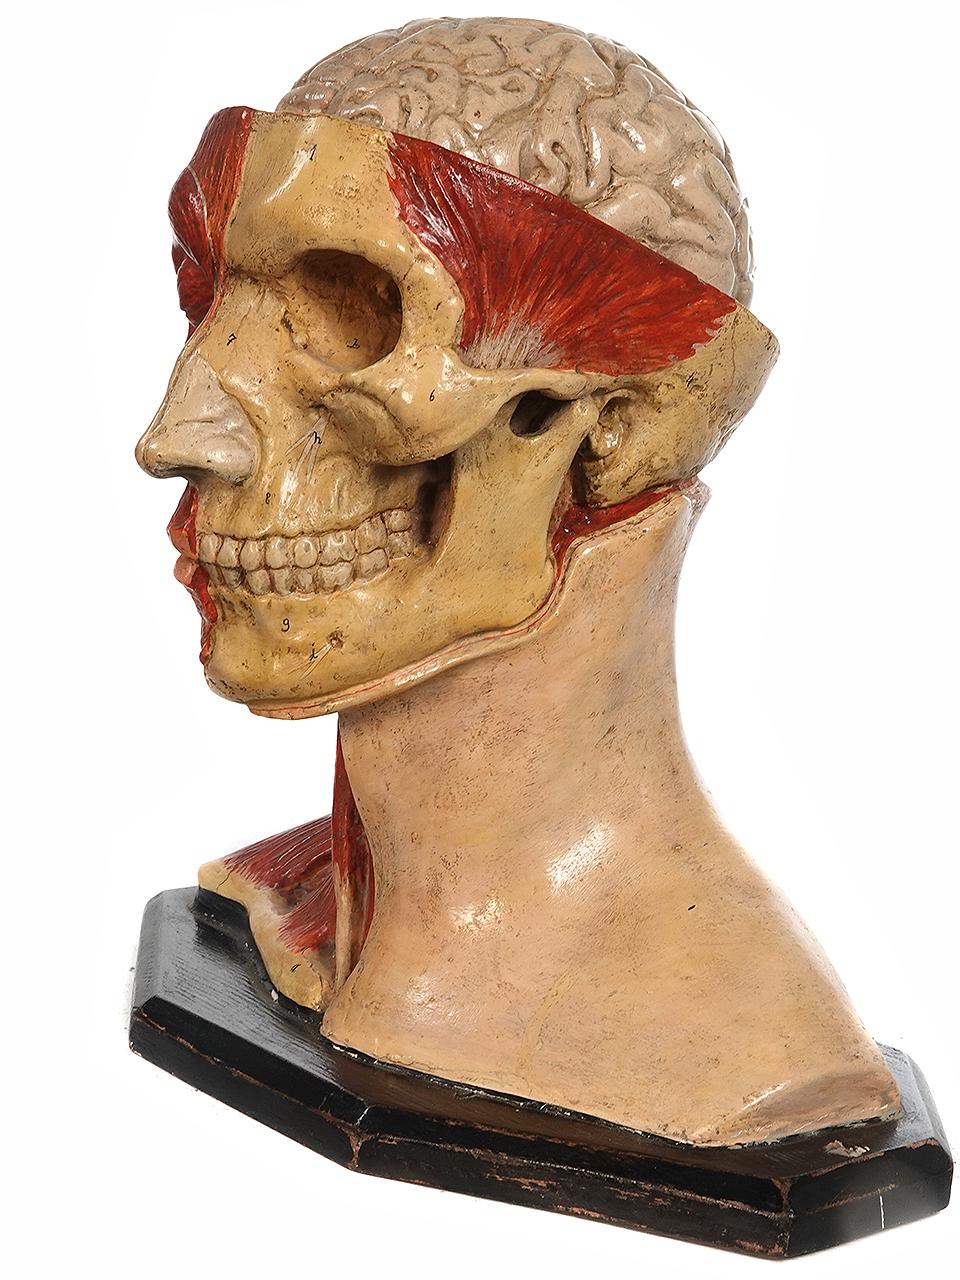 This is an early and high quality hand-painted plaster antique anatomical model of an adult human head. I would date this to 1900. The details are well-done and the brain is removable and splits in two. There is some plaster missing on the bottom of